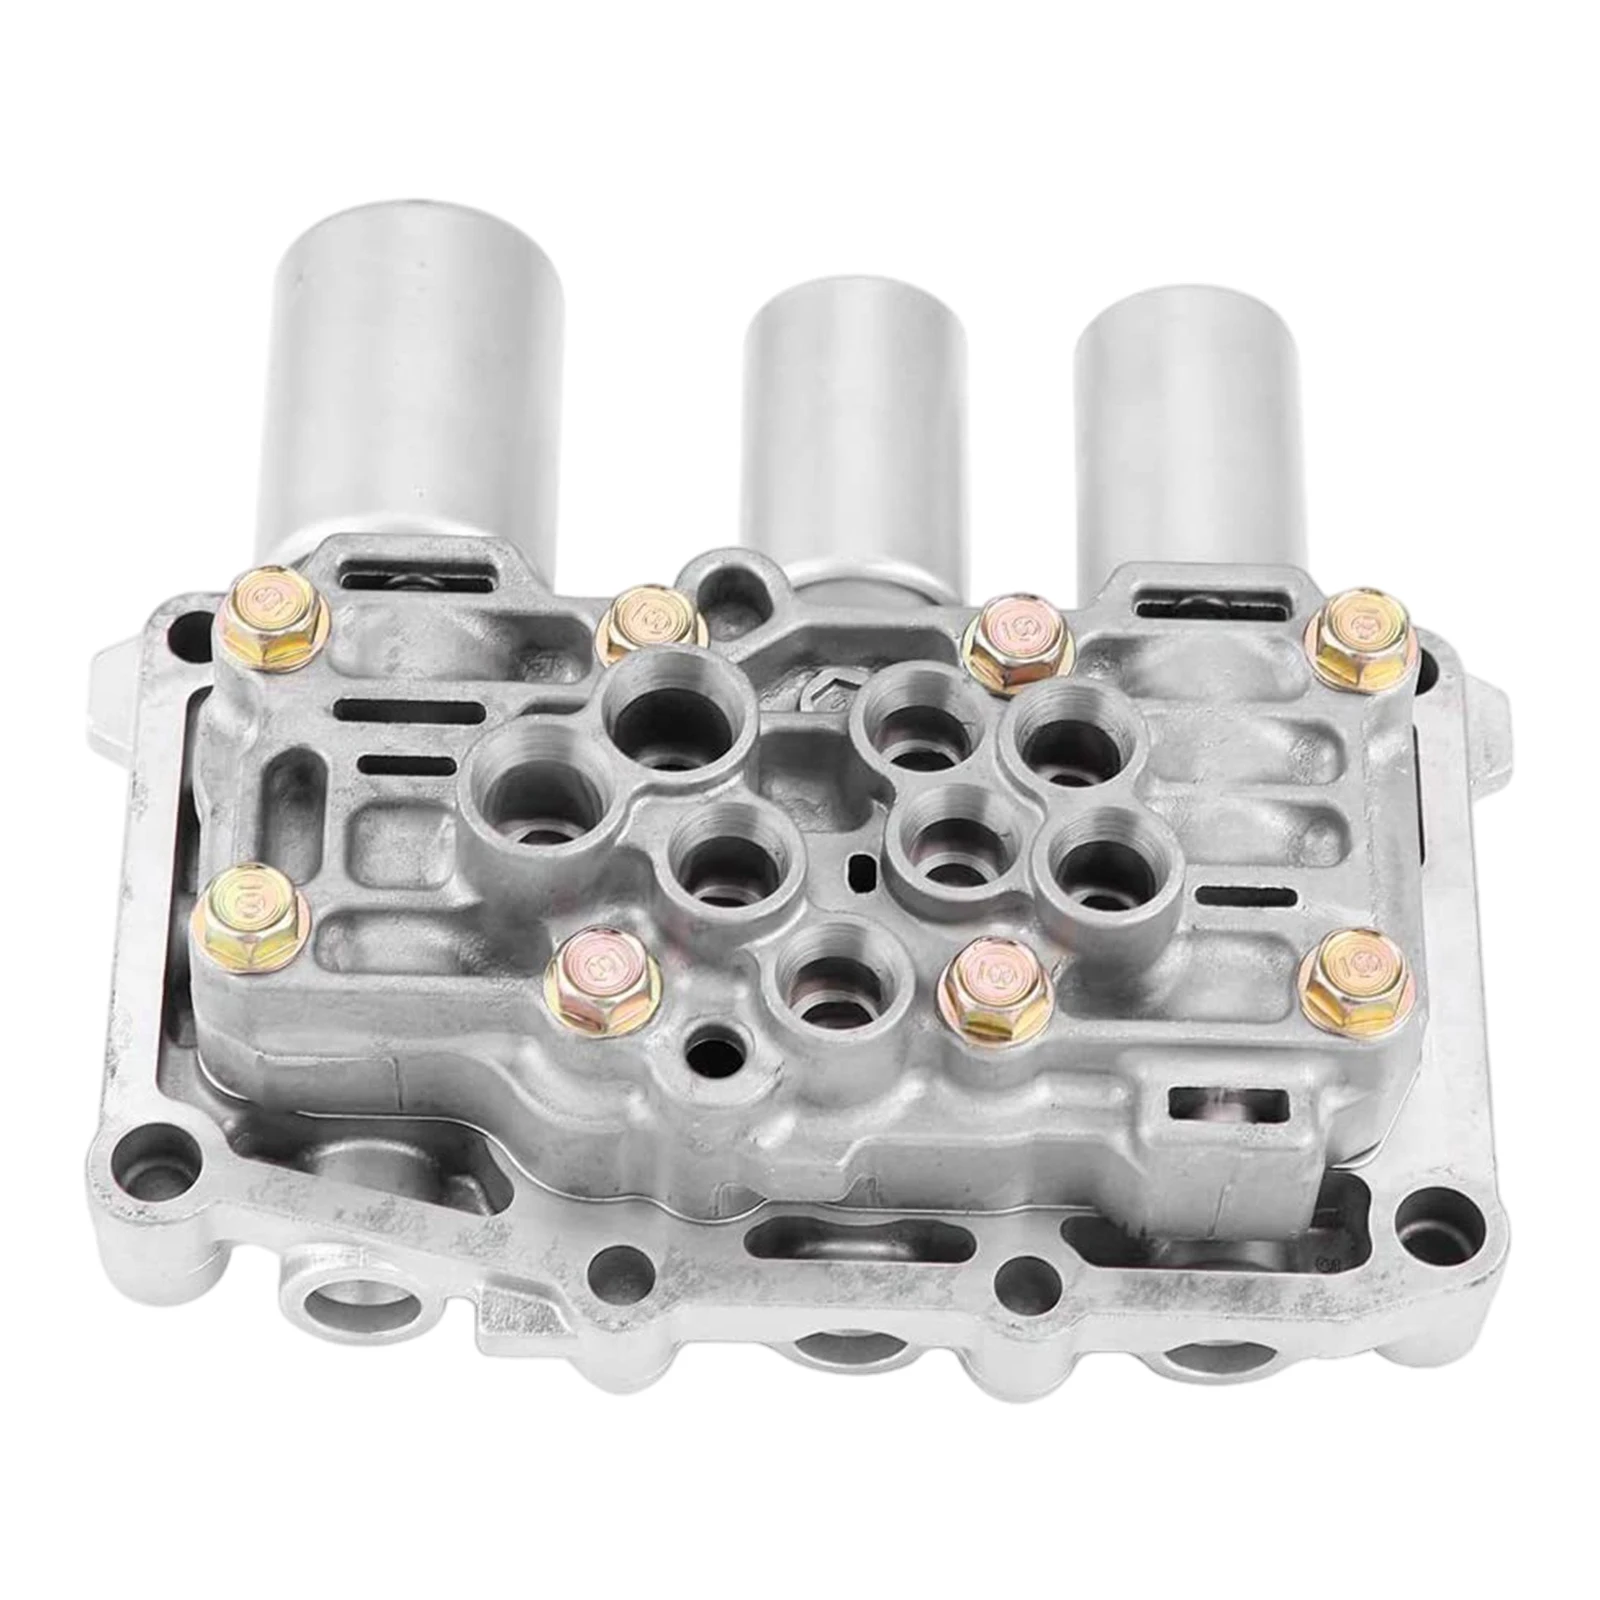 27200-PWR-013 Transmission Solenoid Set Automatic 27200PWR013 Auto Parts Fits for Honda Accessories Vehicles